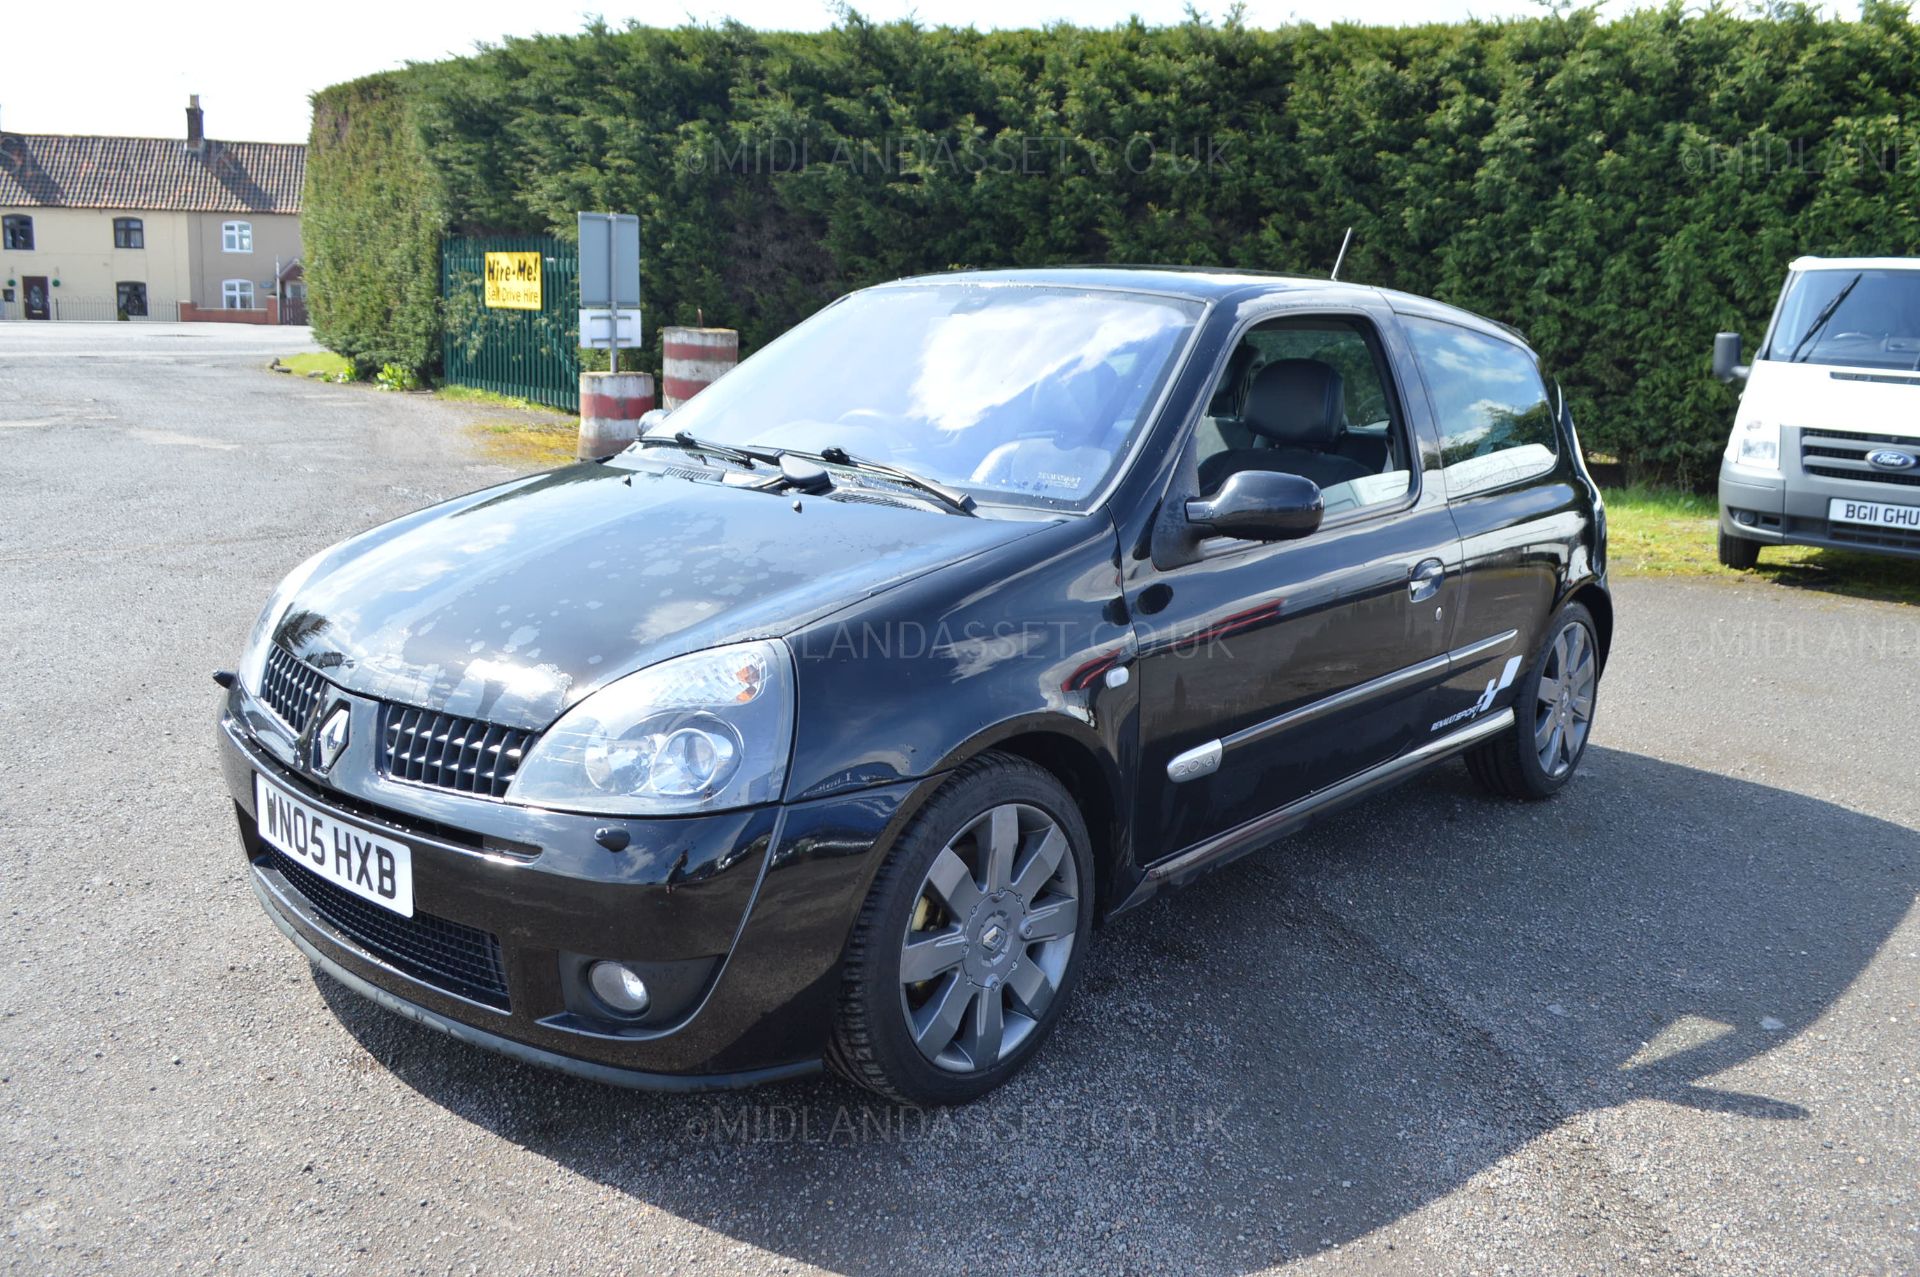 2005/05 REG RENAULT CLIO SPORT 182 16V 2.0 PETROL *NO VAT* STARTS / DRIVES WITHOUT FAULT - VERY - Image 3 of 23